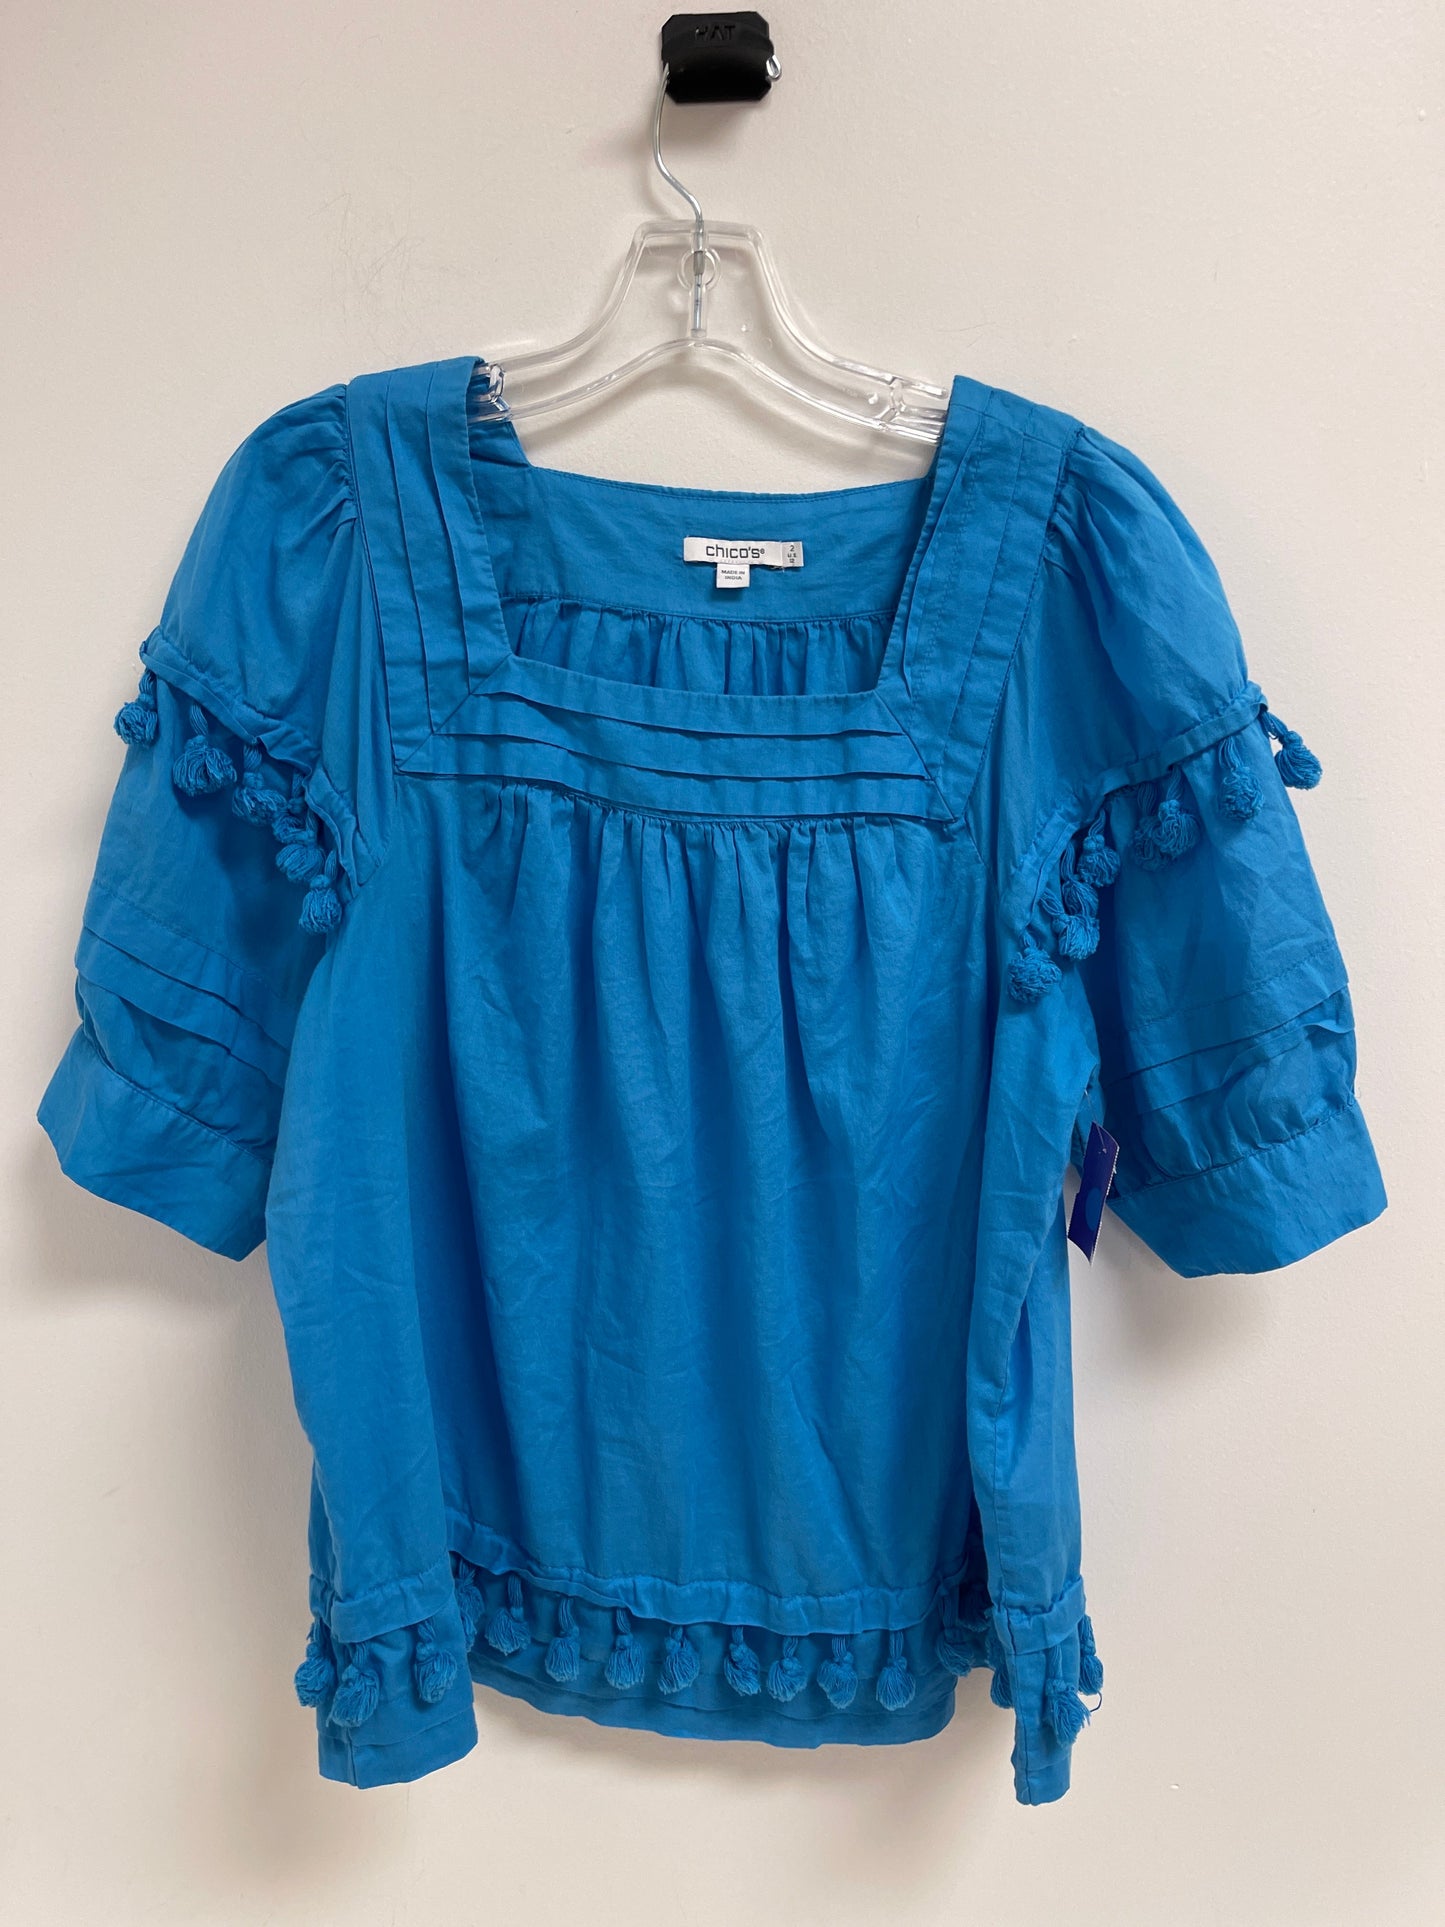 Blue Top Short Sleeve Chicos, Size L